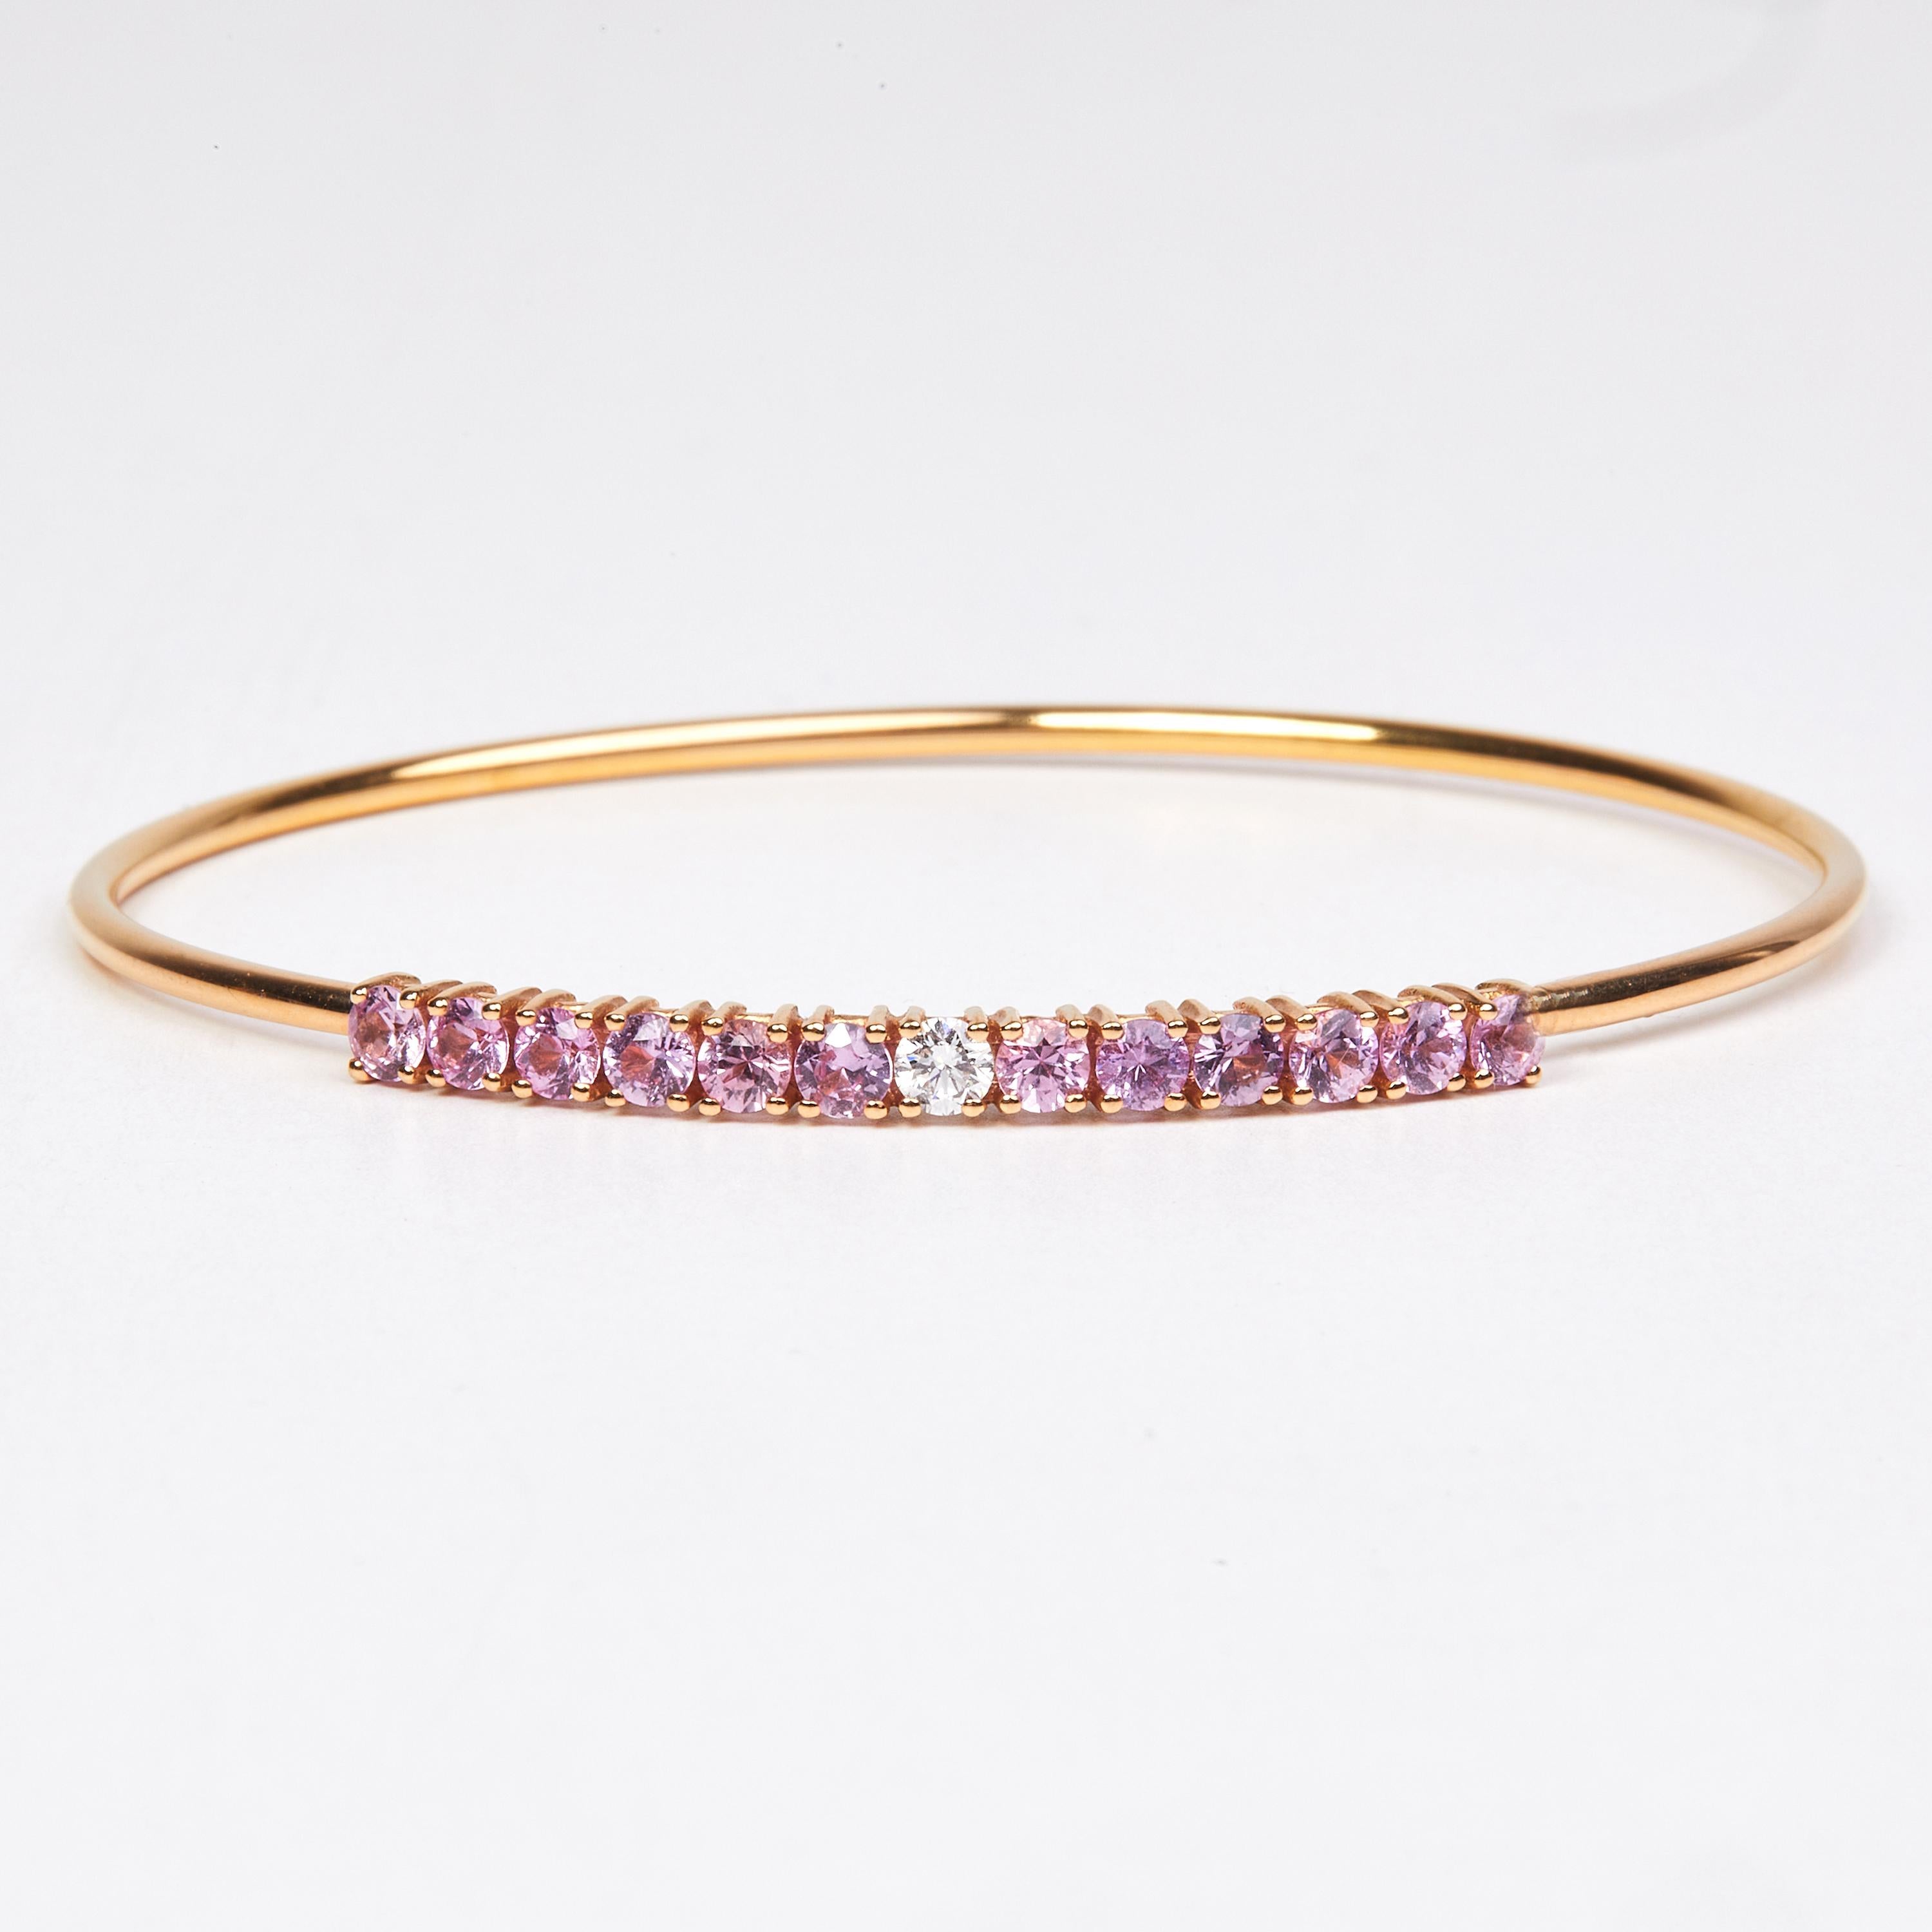 18 Karat Rose Gold Diamond and Pink Sapphire Bracelet

1Diamonds 0.12Carat H SI
12 Pink Sapphire 1.66 Carat
5,7 x 5.0 cm


Founded in 1974, Gianni Lazzaro is a family-owned jewelry company based out of Düsseldorf, Germany.
Although rooted in